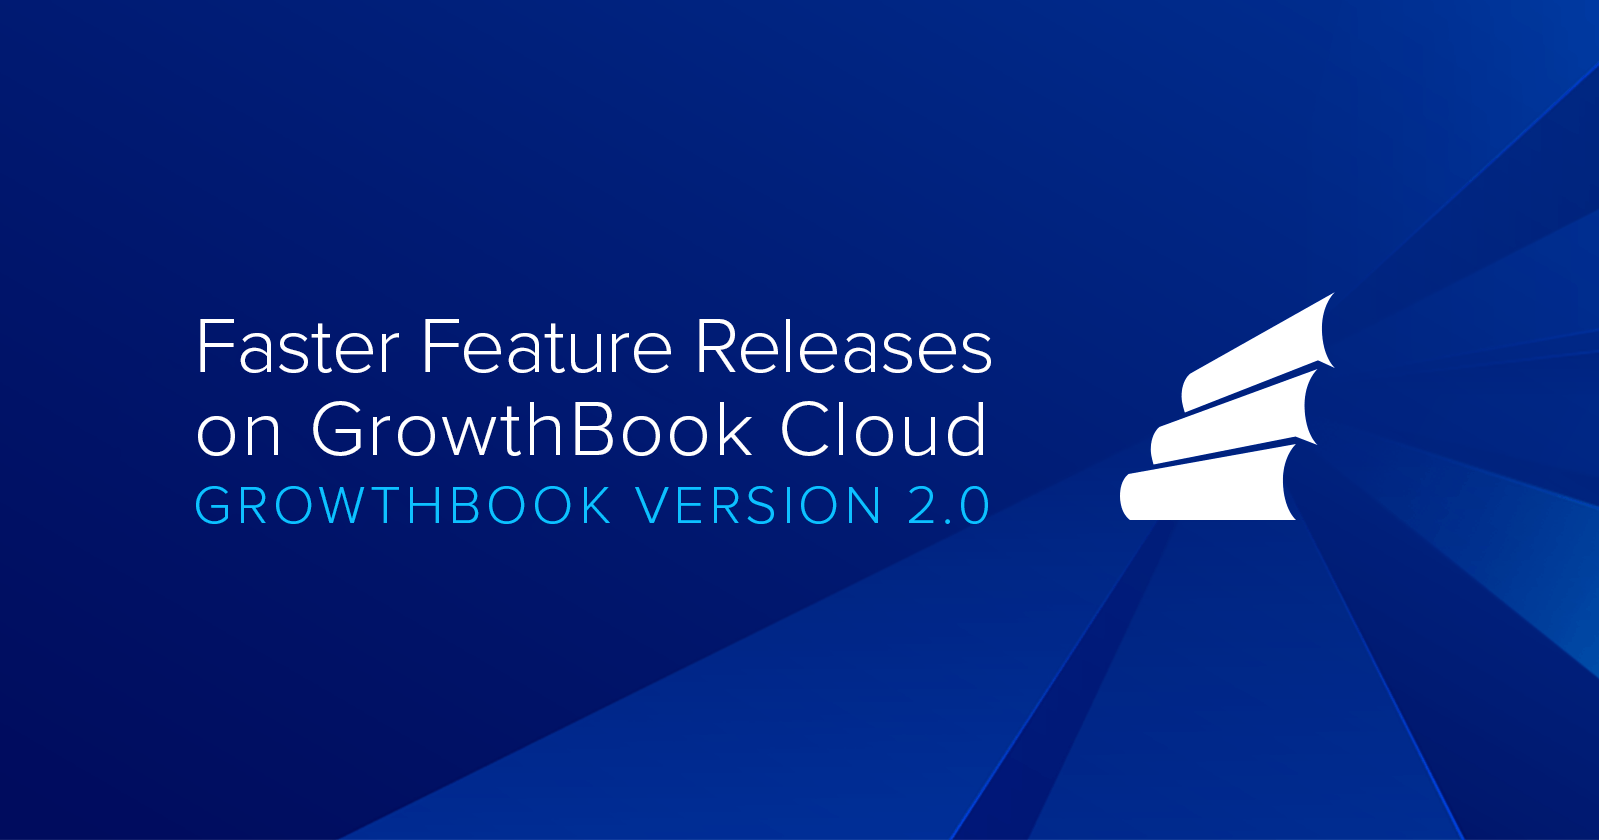 Faster Feature Releases on GrowthBook Cloud